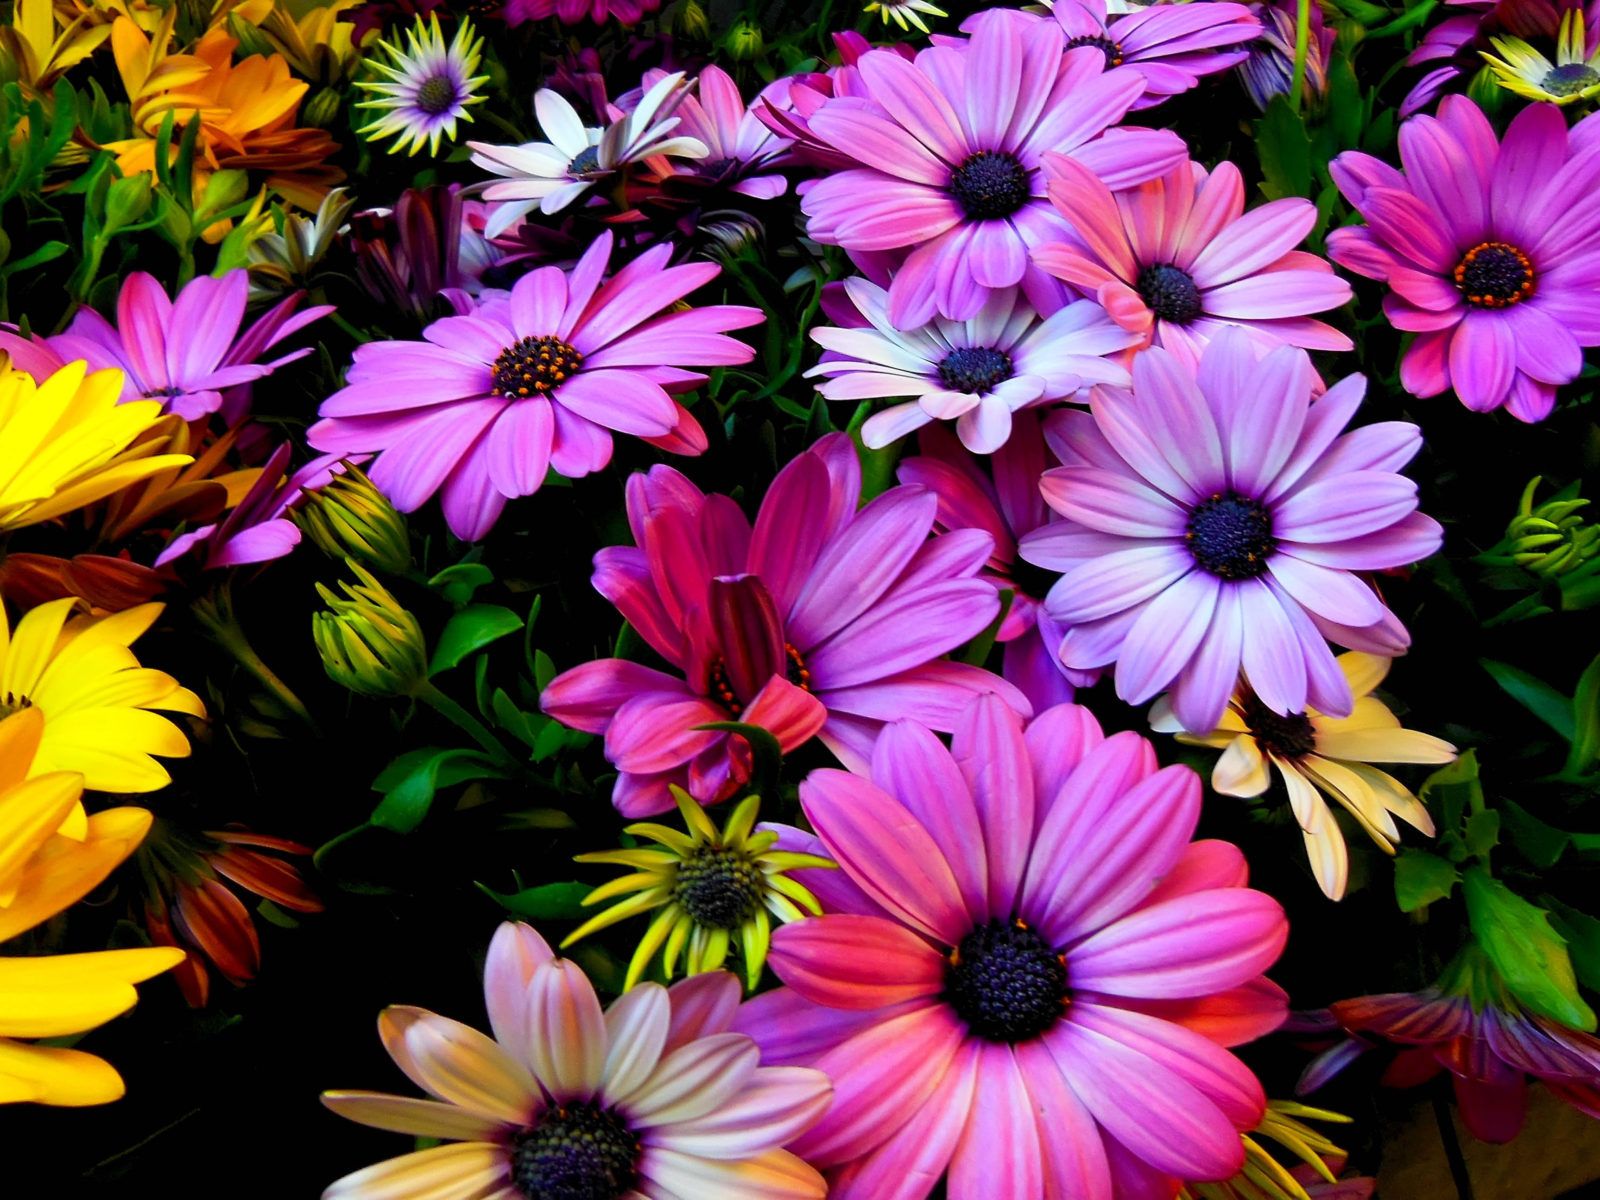 Spring Flowers Wallpaper For Desktop Osteospermum African Daisies Flowers Pink Purple And Yellow Color 4604x2590, Wallpaper13.com